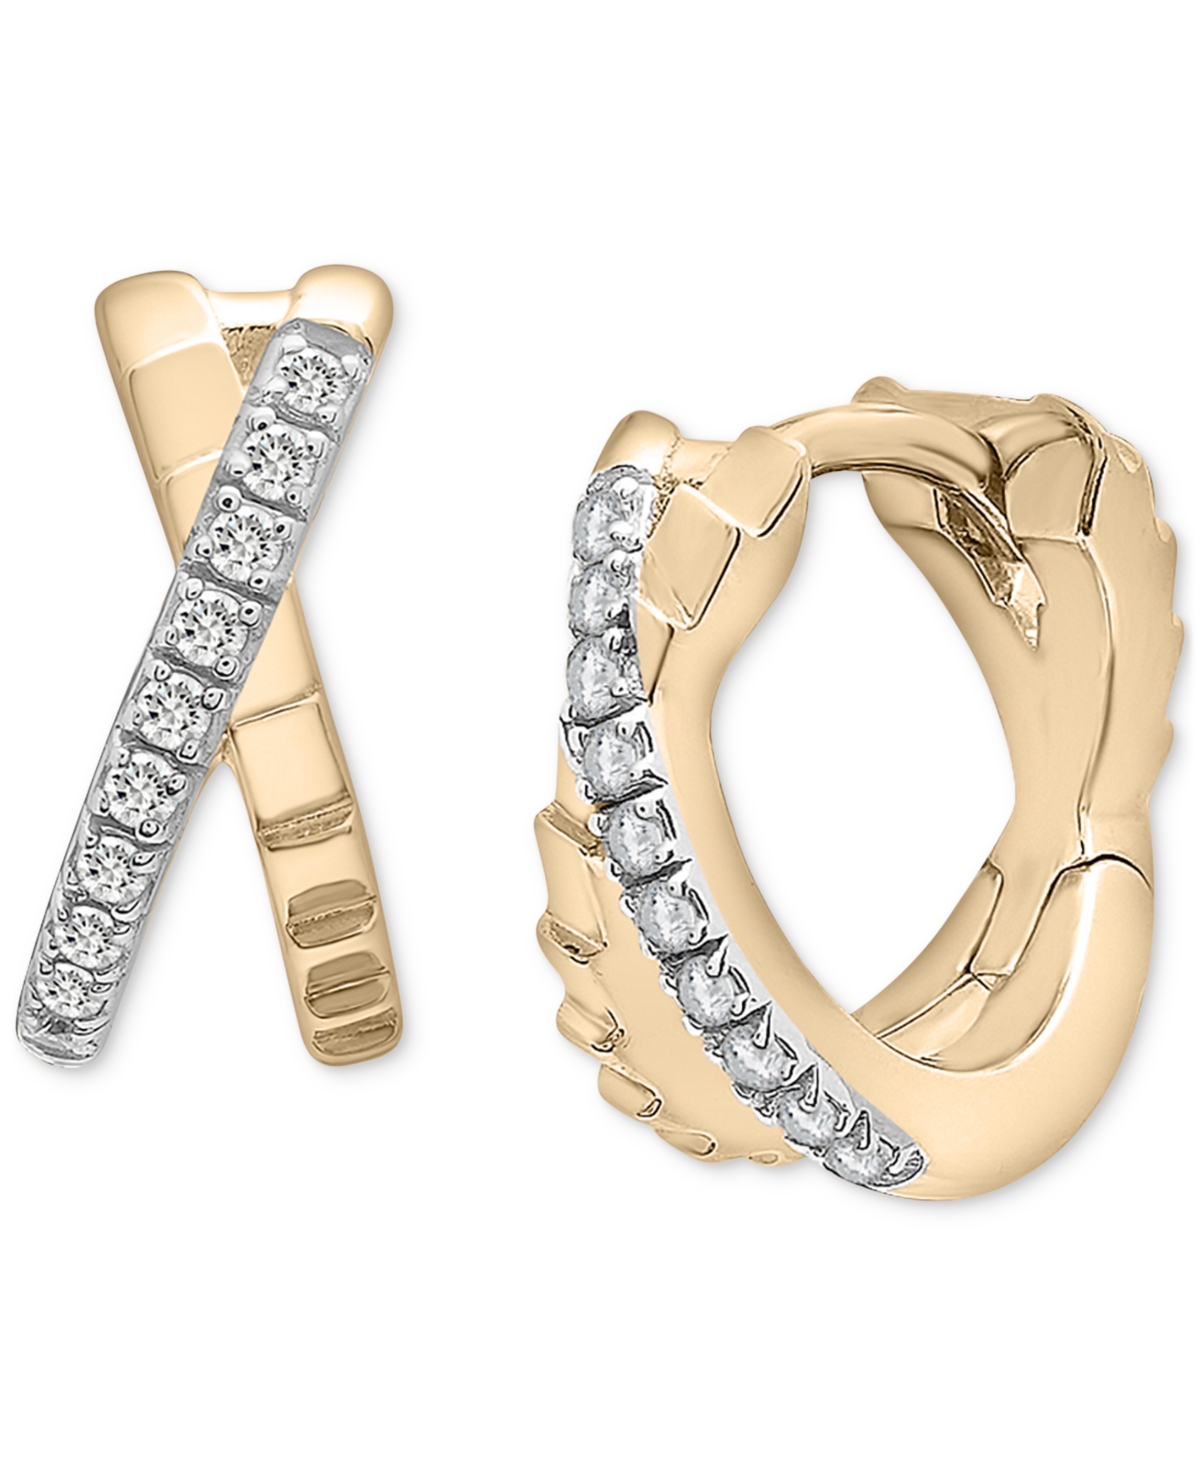 Diamond Crossover Small Hoop Earrings (1/10 ct. t.w.) in Gold Vermeil, Created for Macy's - Gold Vermeil